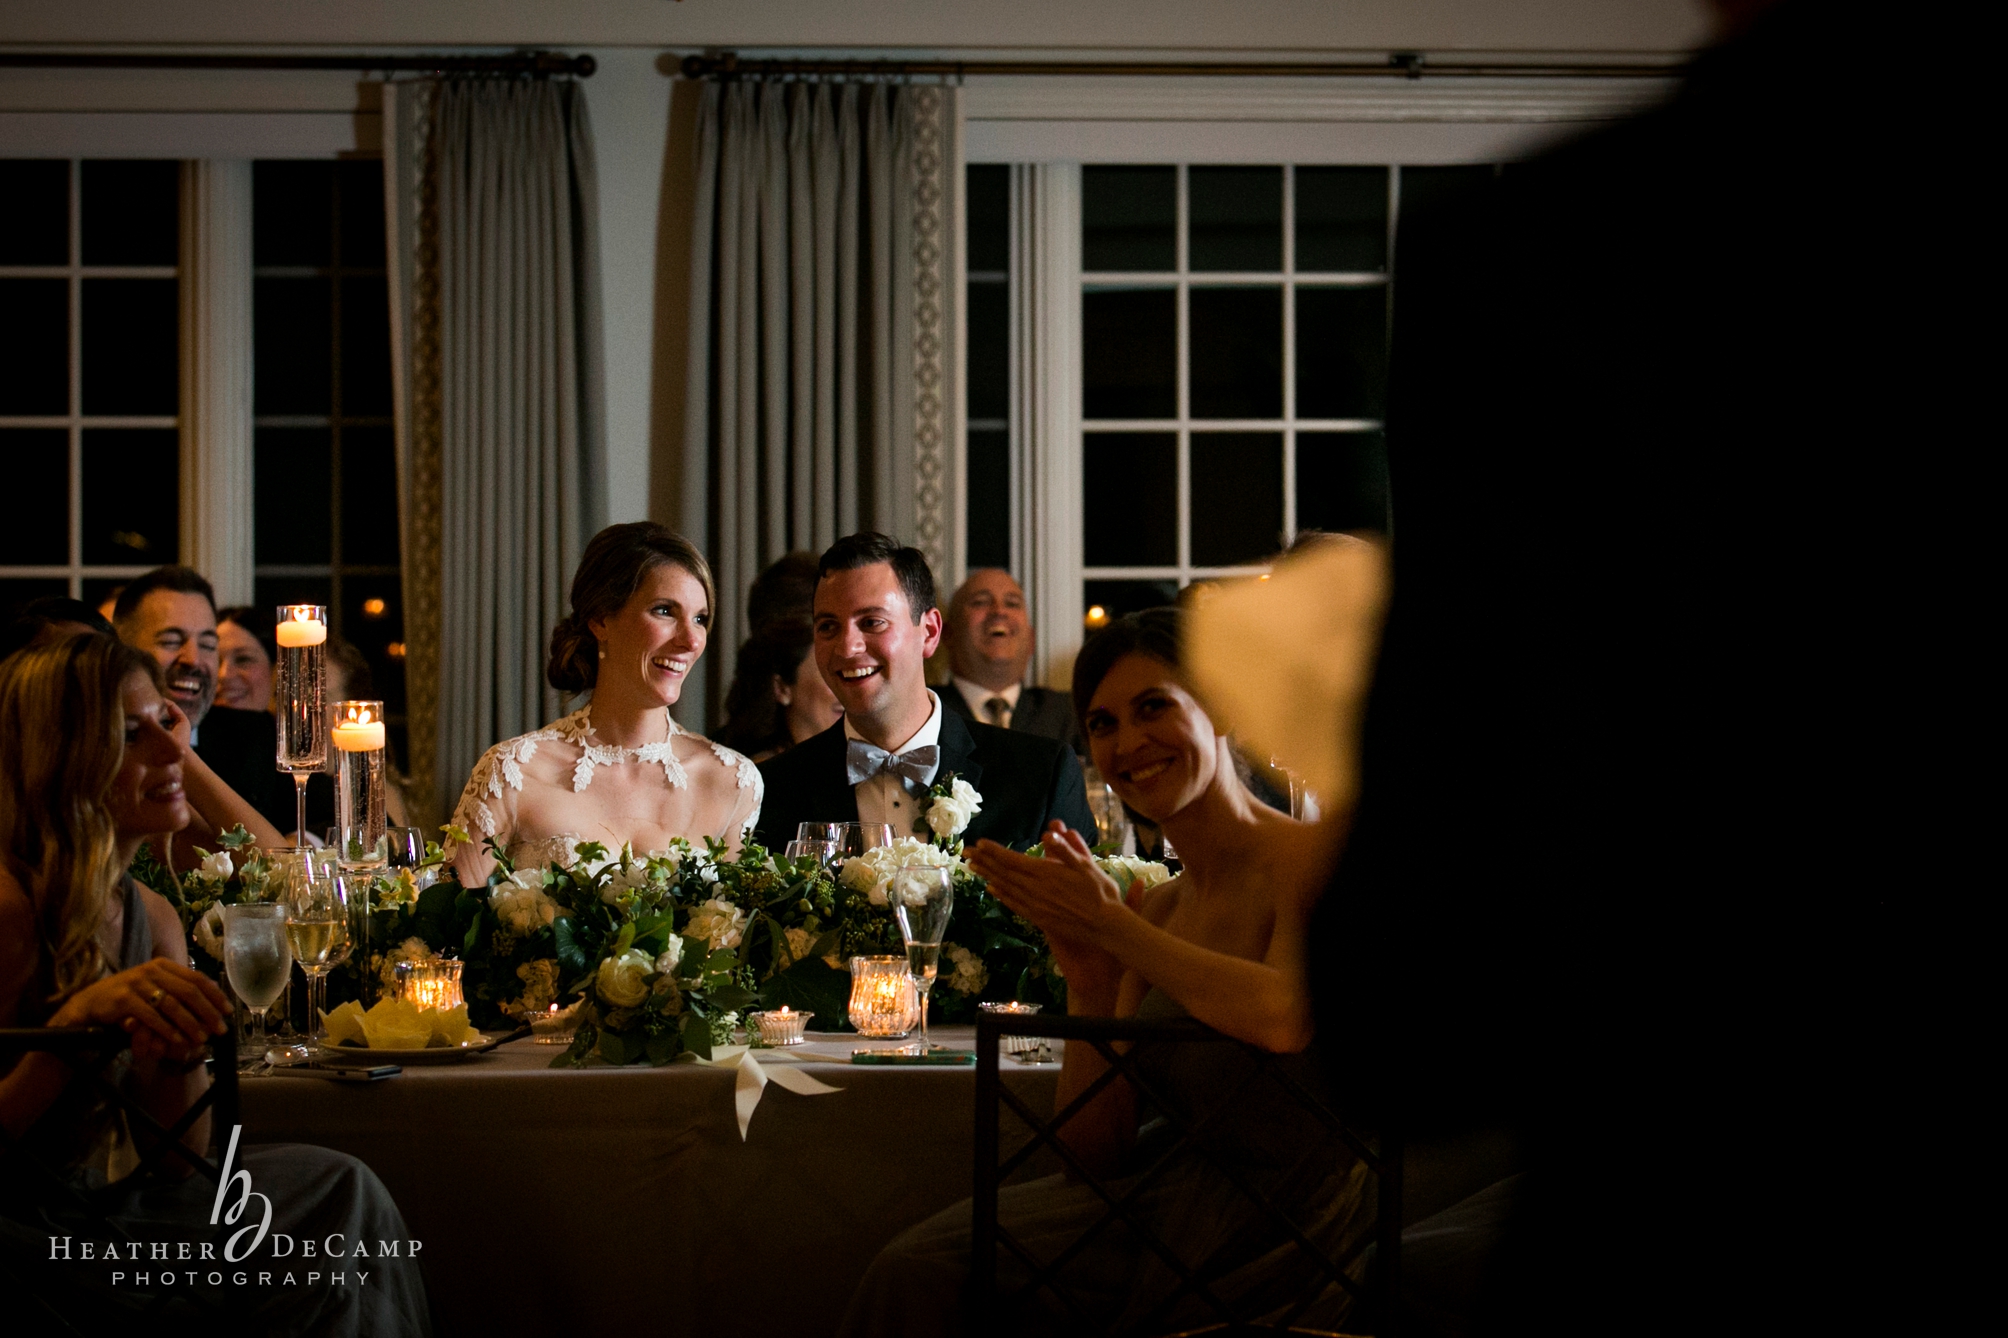 Wedding Photography at the North Shore Country Club in Glenview Illinois in the fall